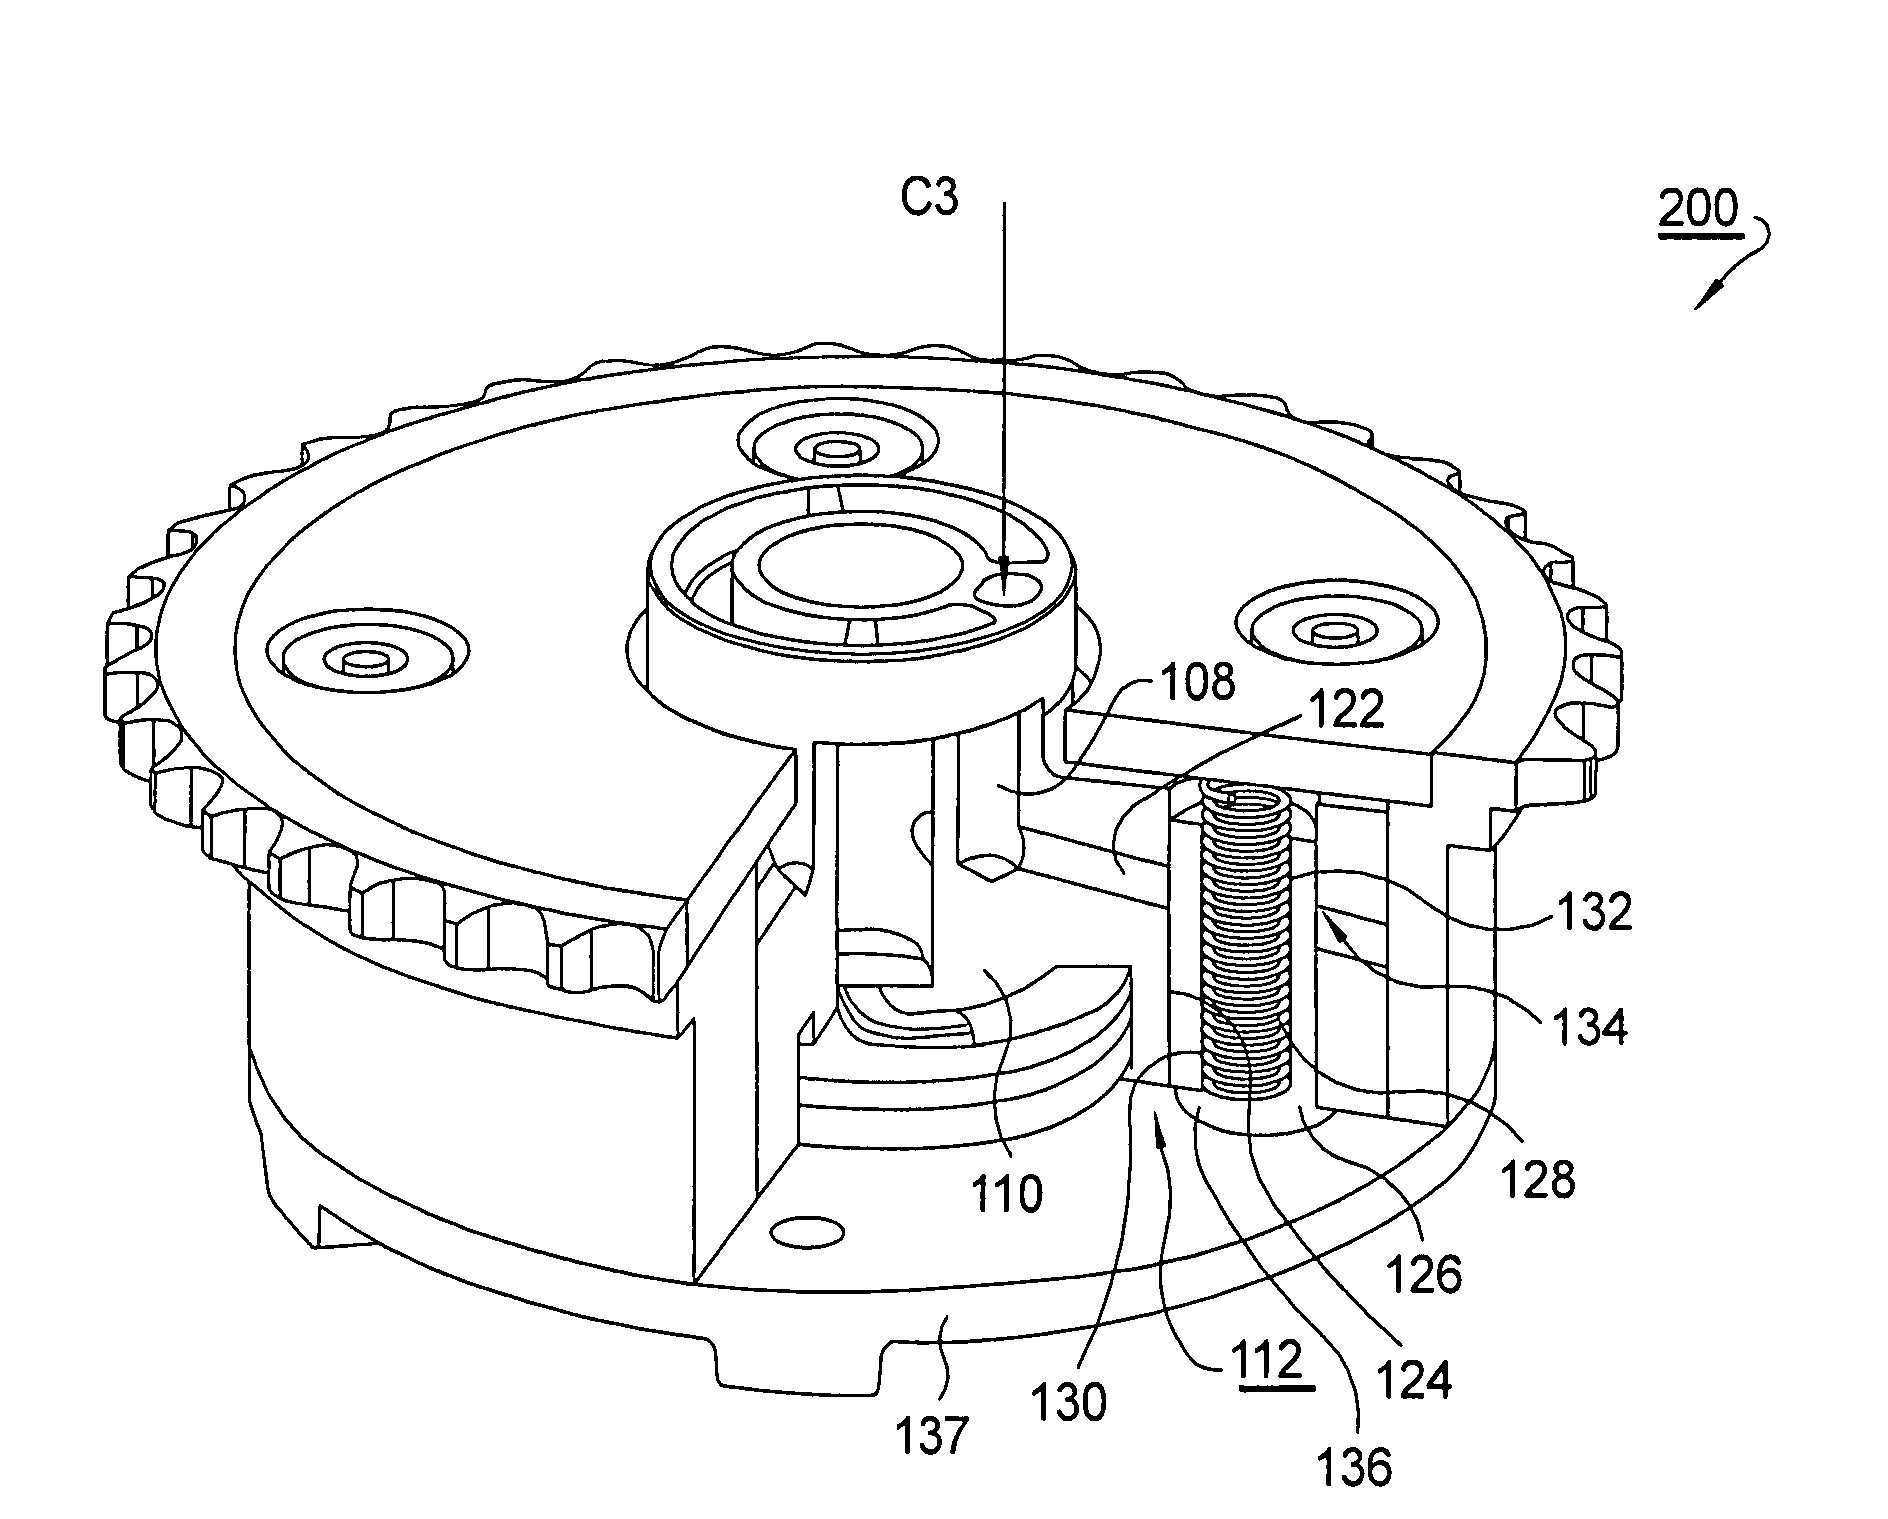 Vane-type cam phaser having increased rotational authority, intermediate position locking, and dedicated oil supply